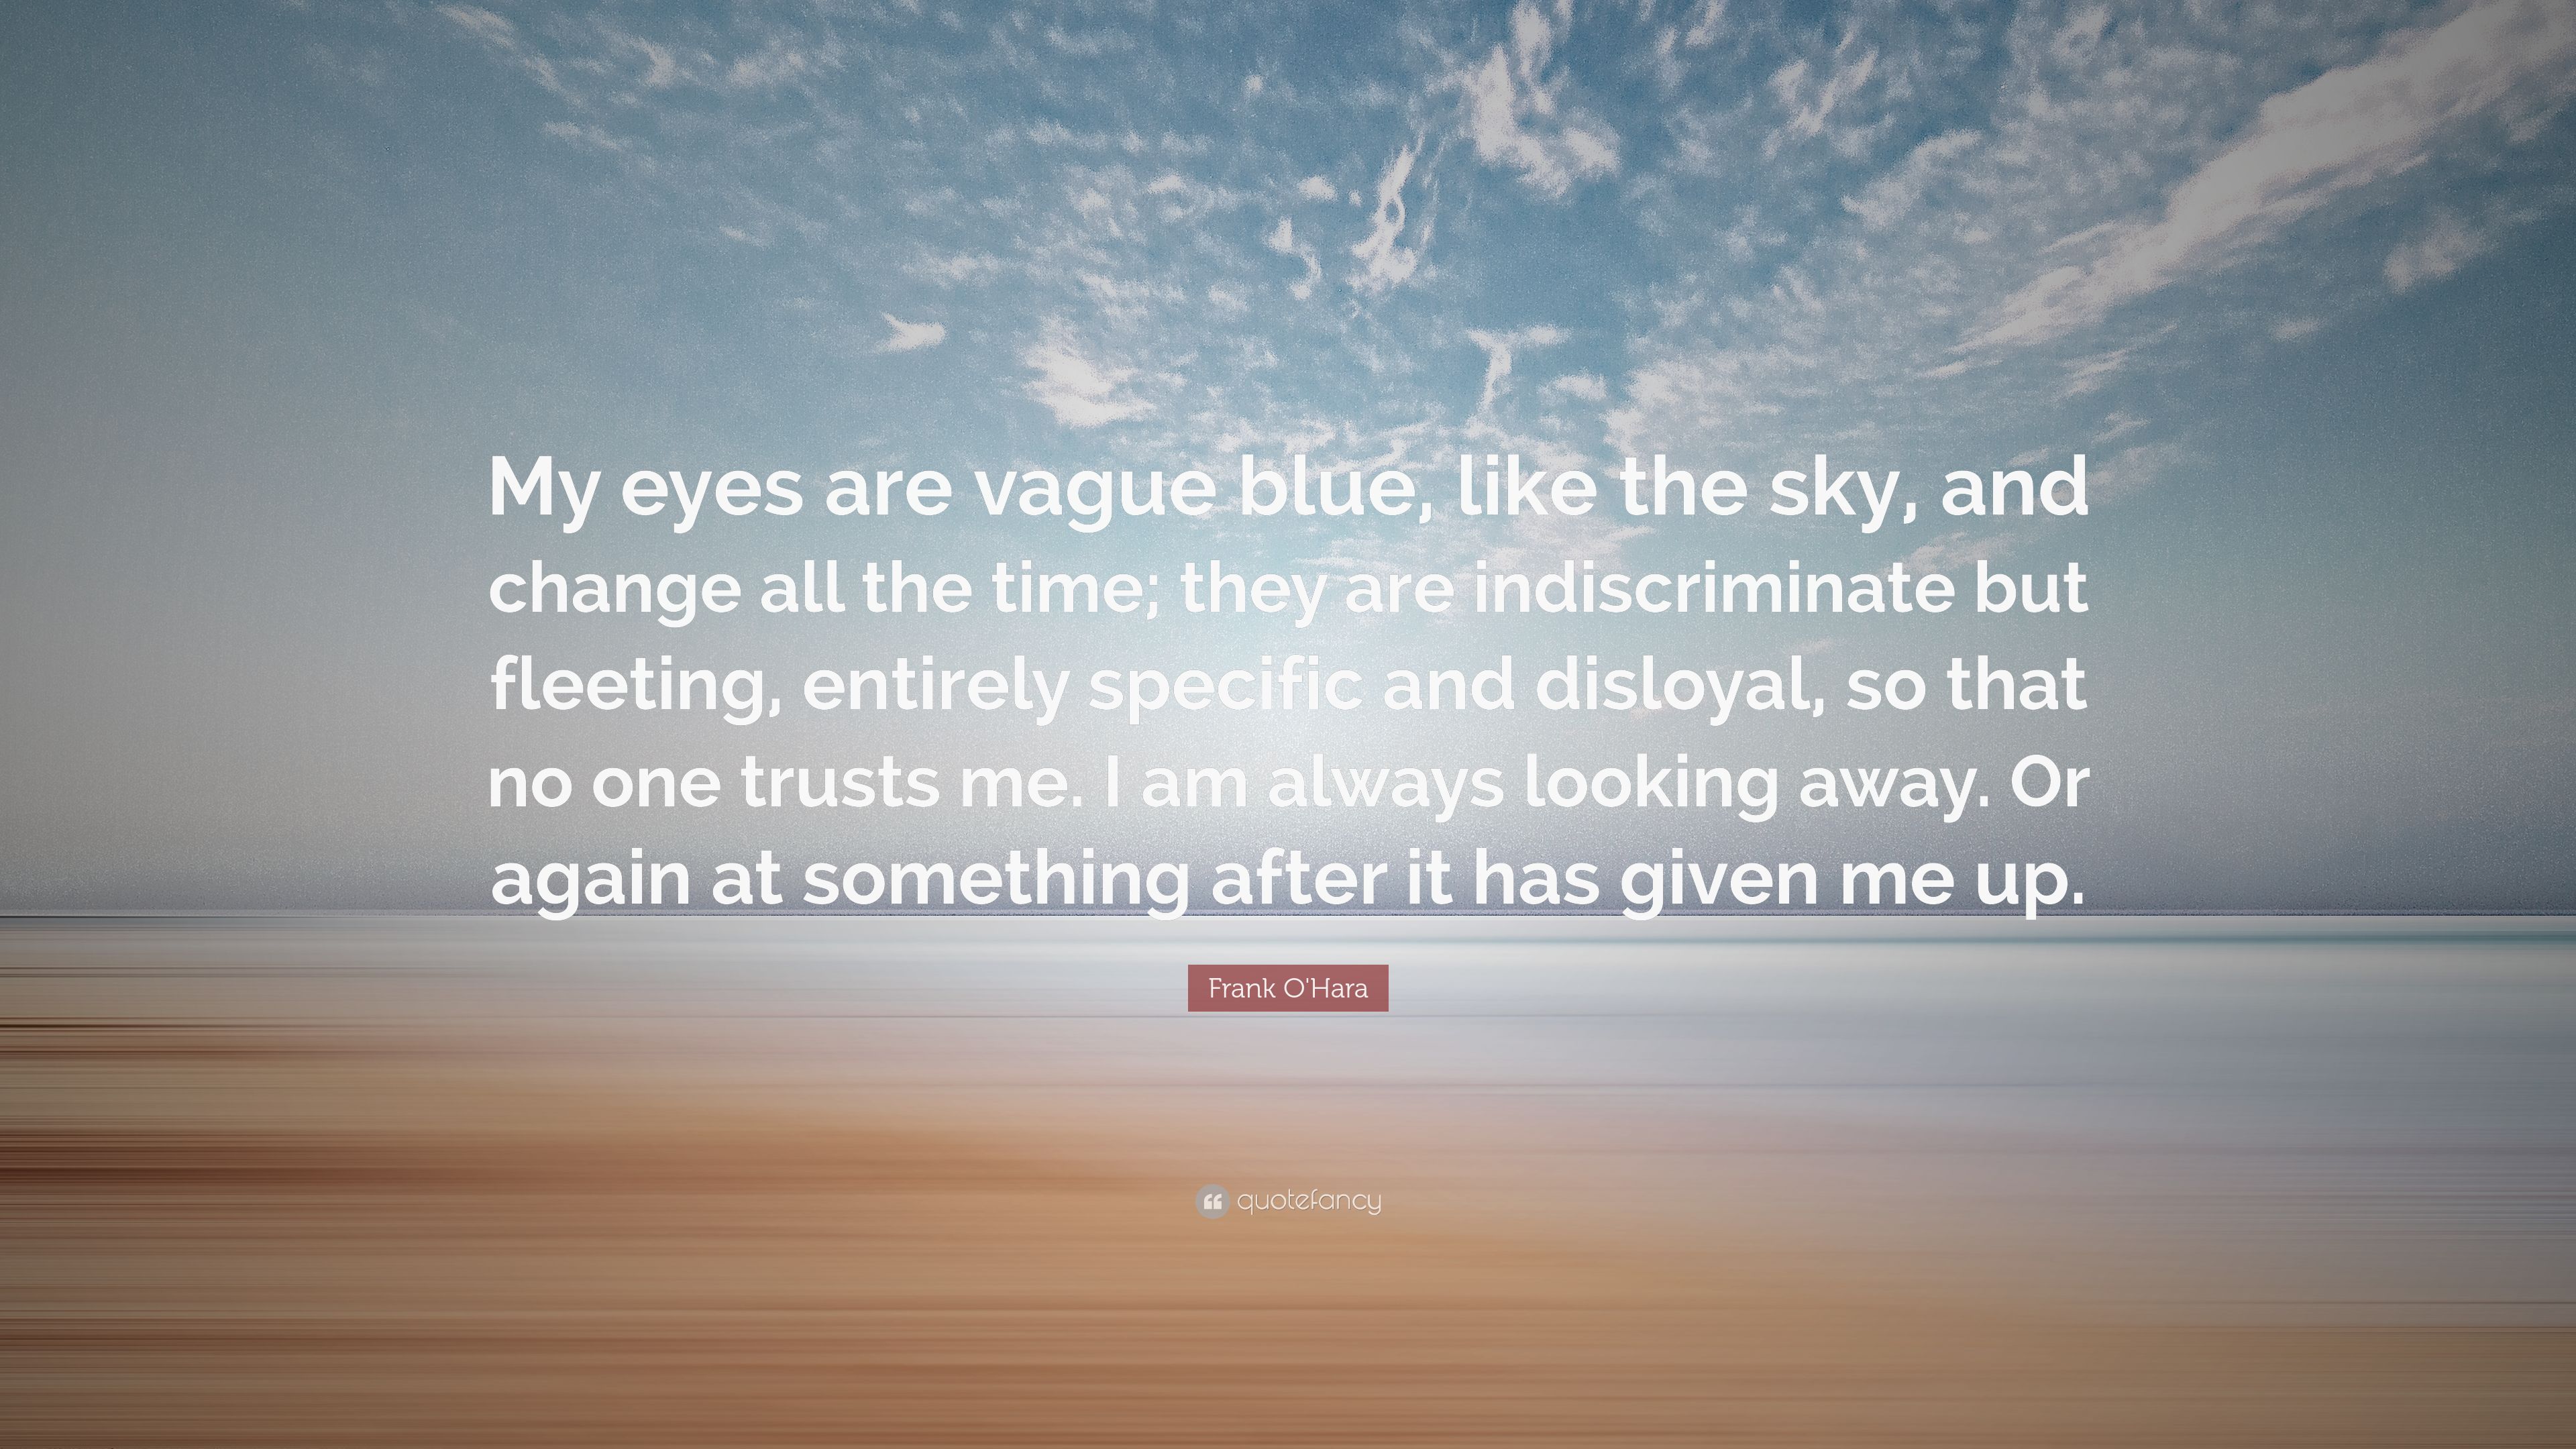 Frank O'Hara Quote: “My eyes are vague blue, like the sky, and ...